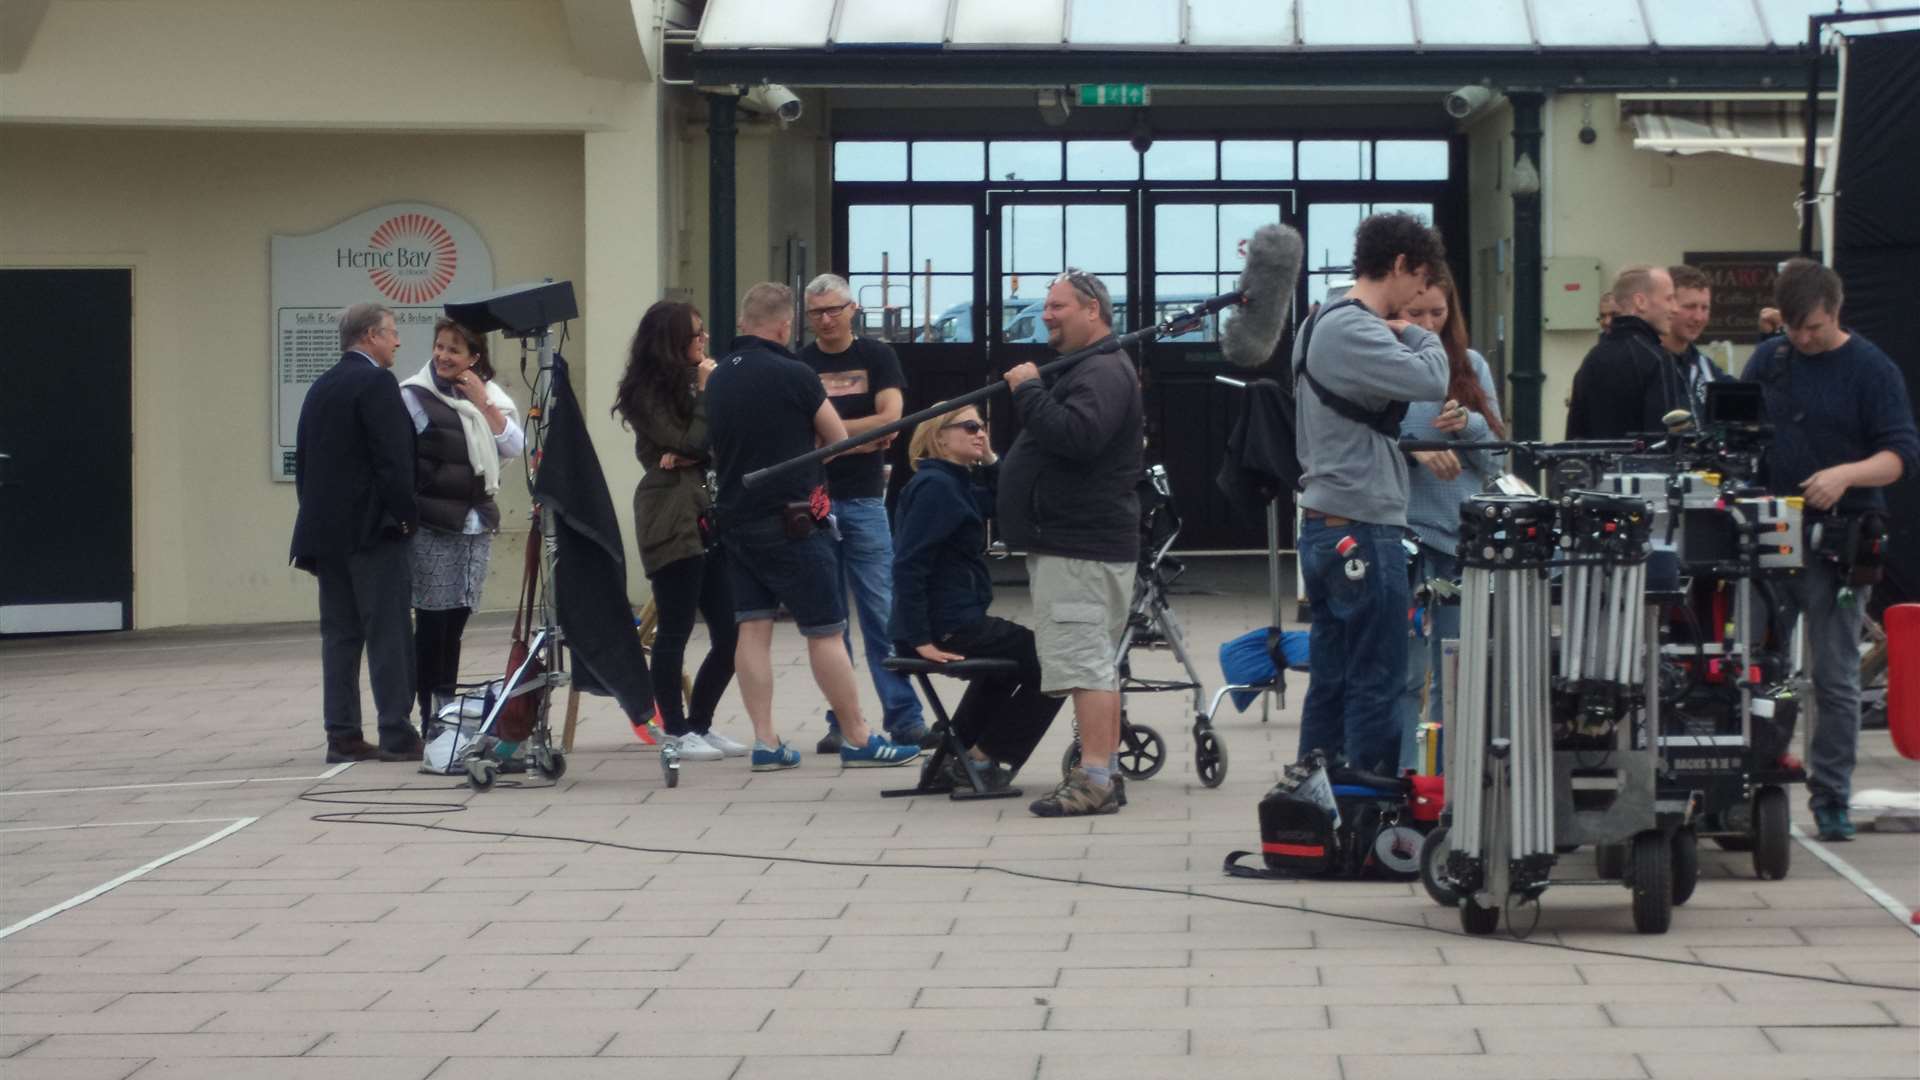 Film crews at work in the Central Bandstand in Herne Bay